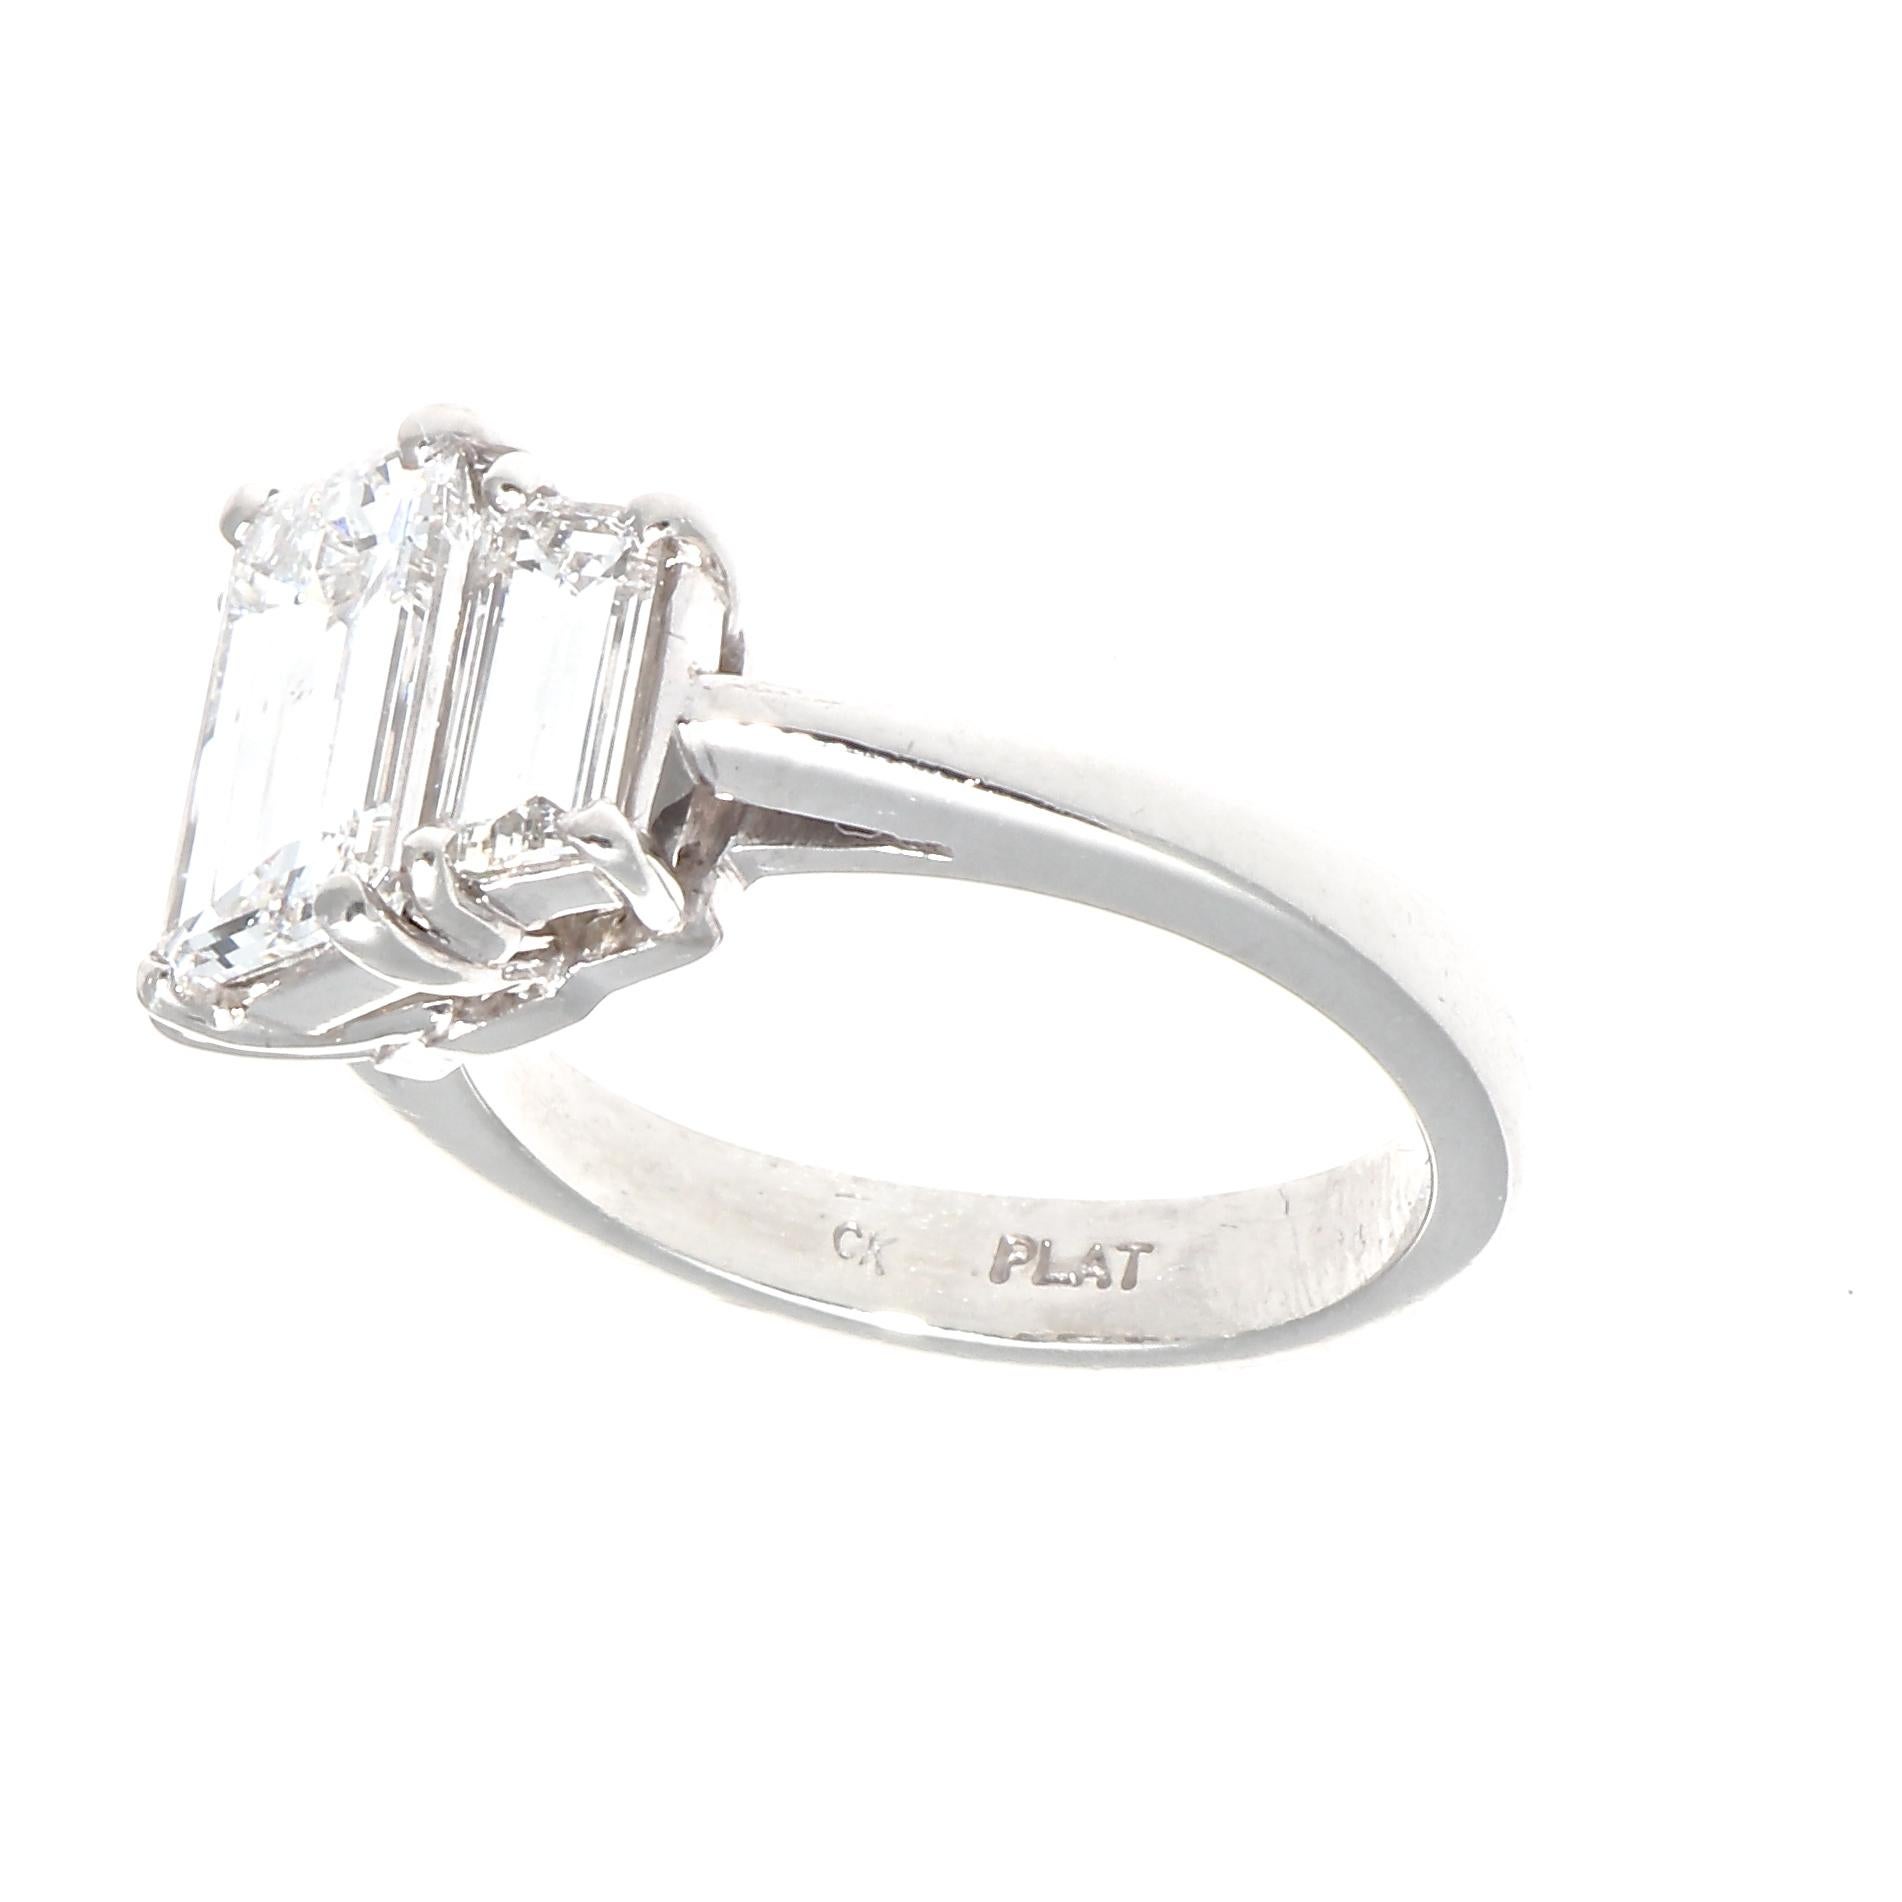 A design as timeless as an everlasting marriage. The classic three stone engagement ring featuring a 1.57 carat emerald cut diamond that is GIA certified as F color, SI1 clarity. Crafted in platinum.

Ring size 5 and can easily be resized to fit, if